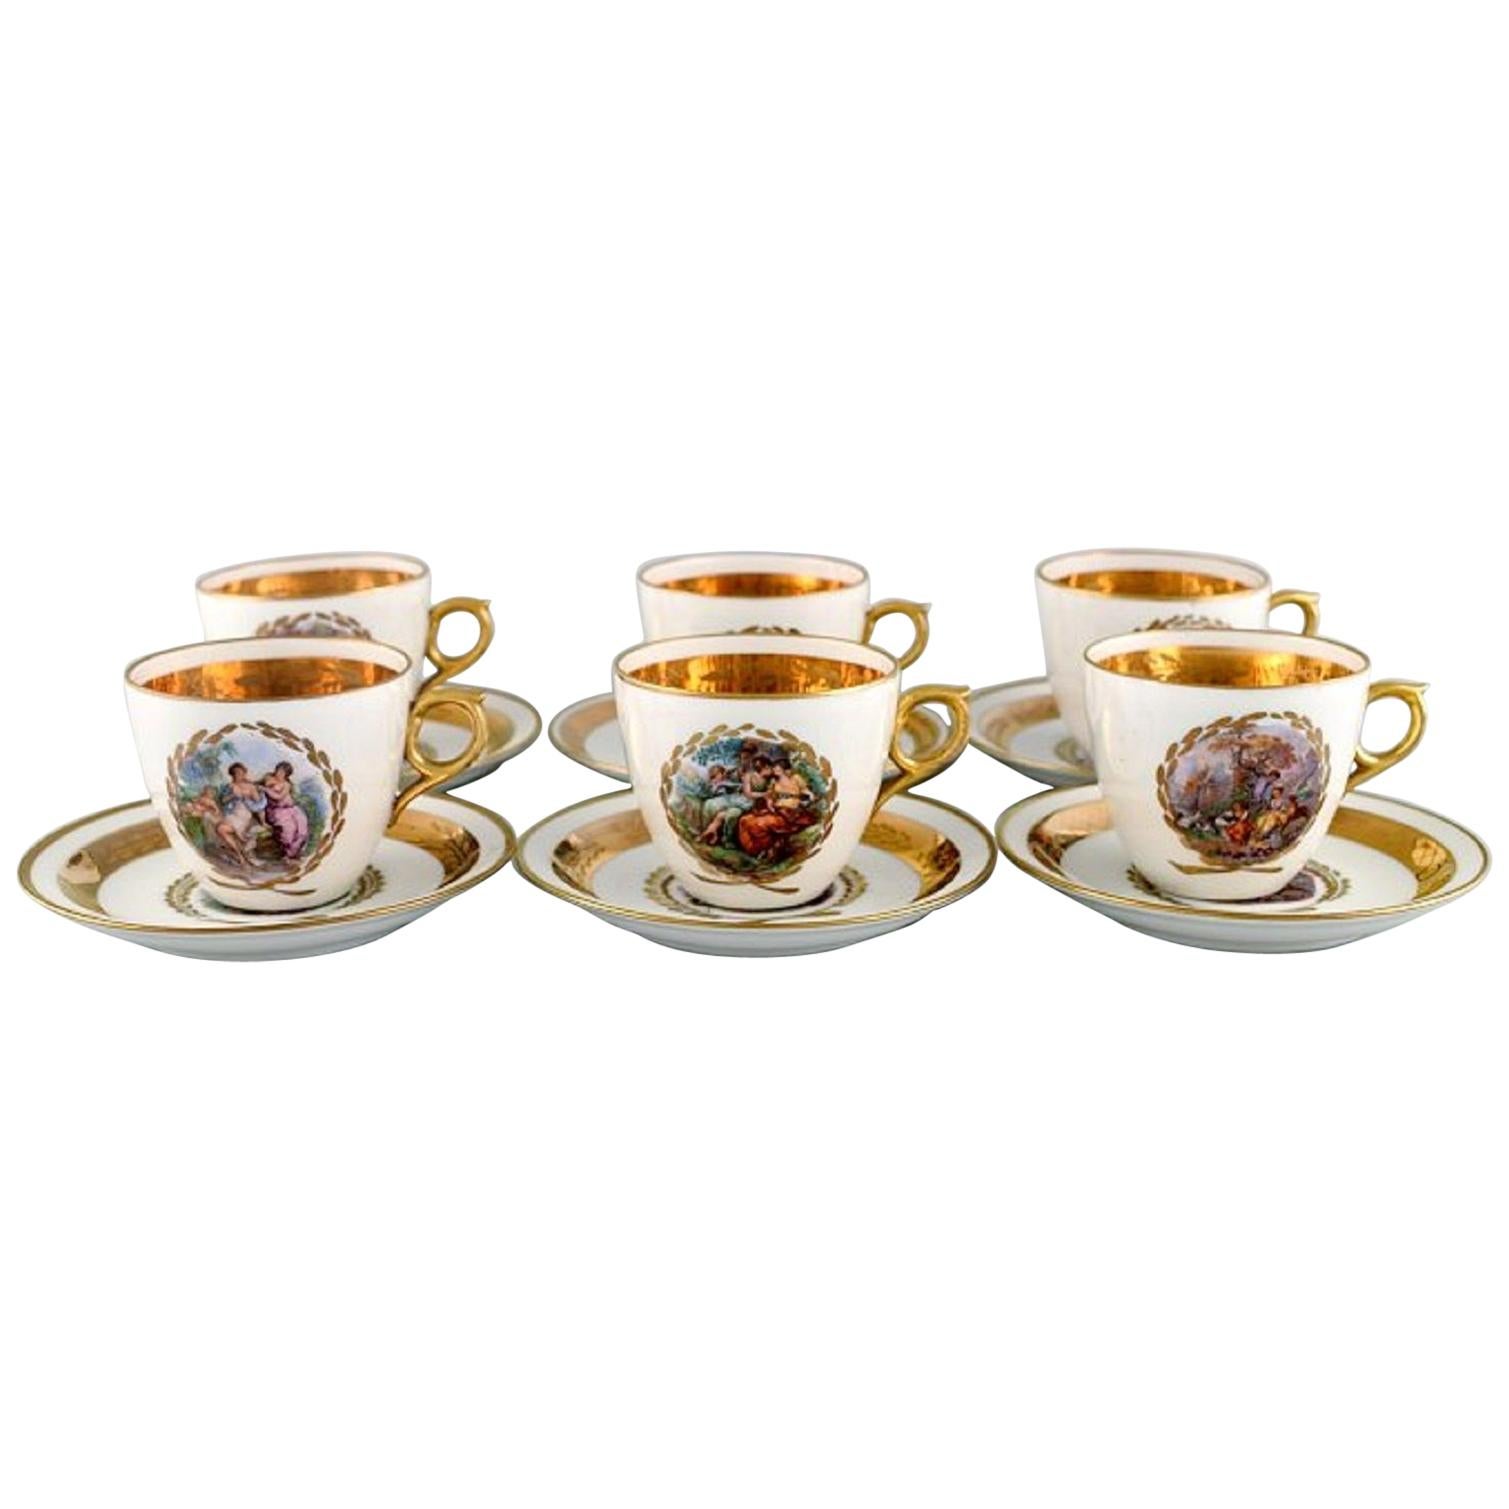 Six Royal Copenhagen Coffee Cups with Saucers in Porcelain with Romantic Scenes